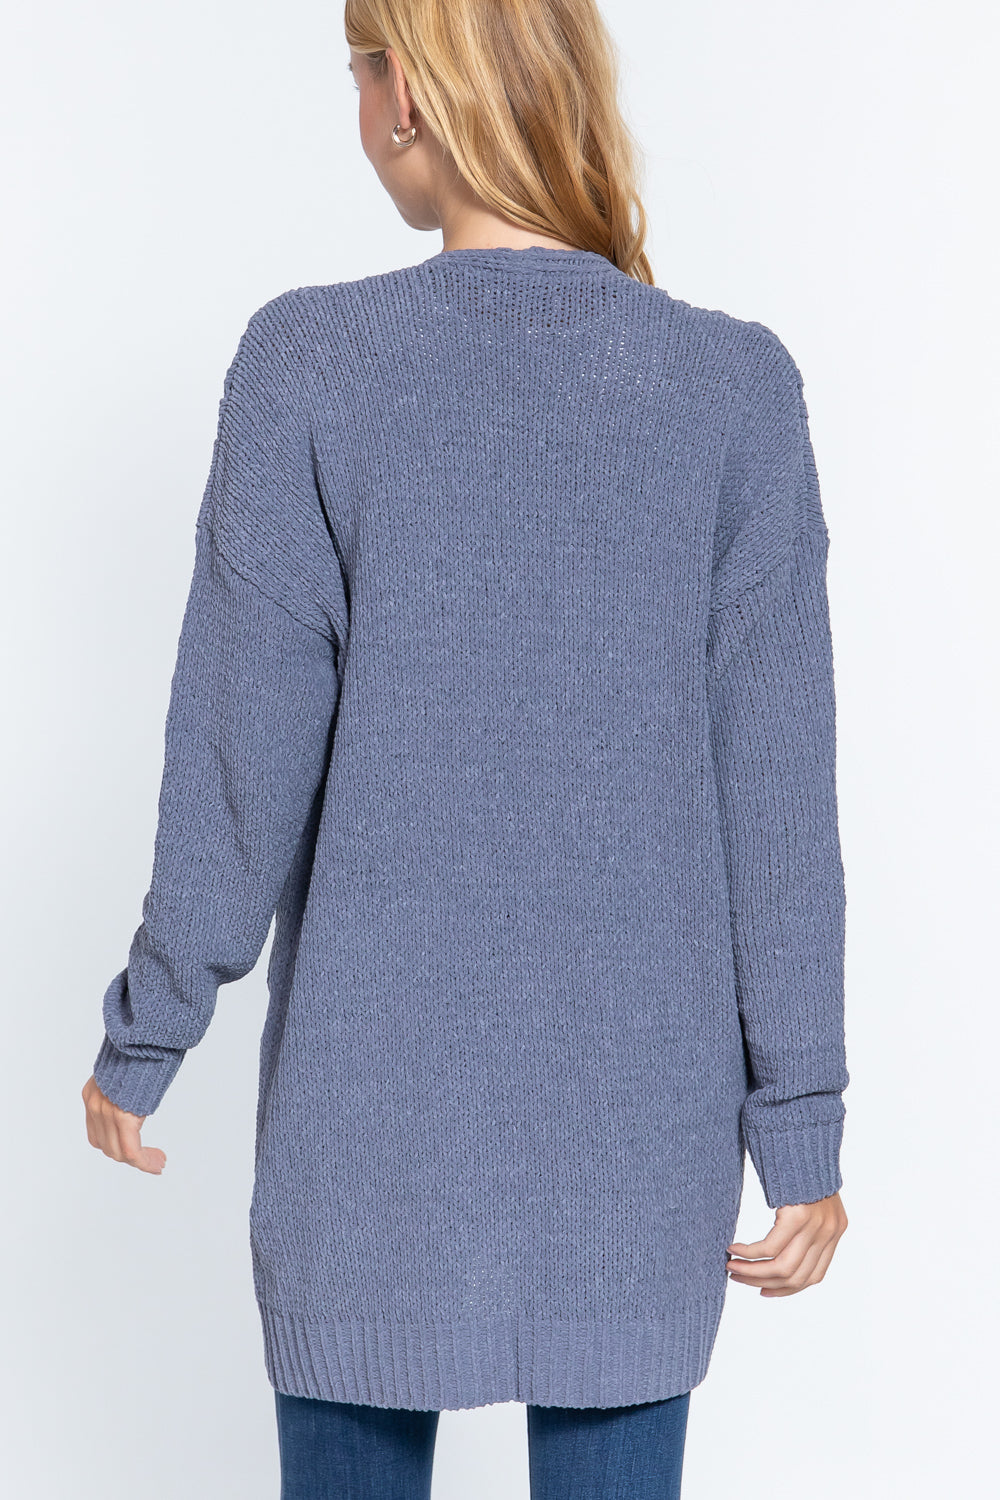 GREYISH BLUE - Chenille Sweater Cardigan - 3 colors - Ships from The US - womens cardigan at TFC&H Co.